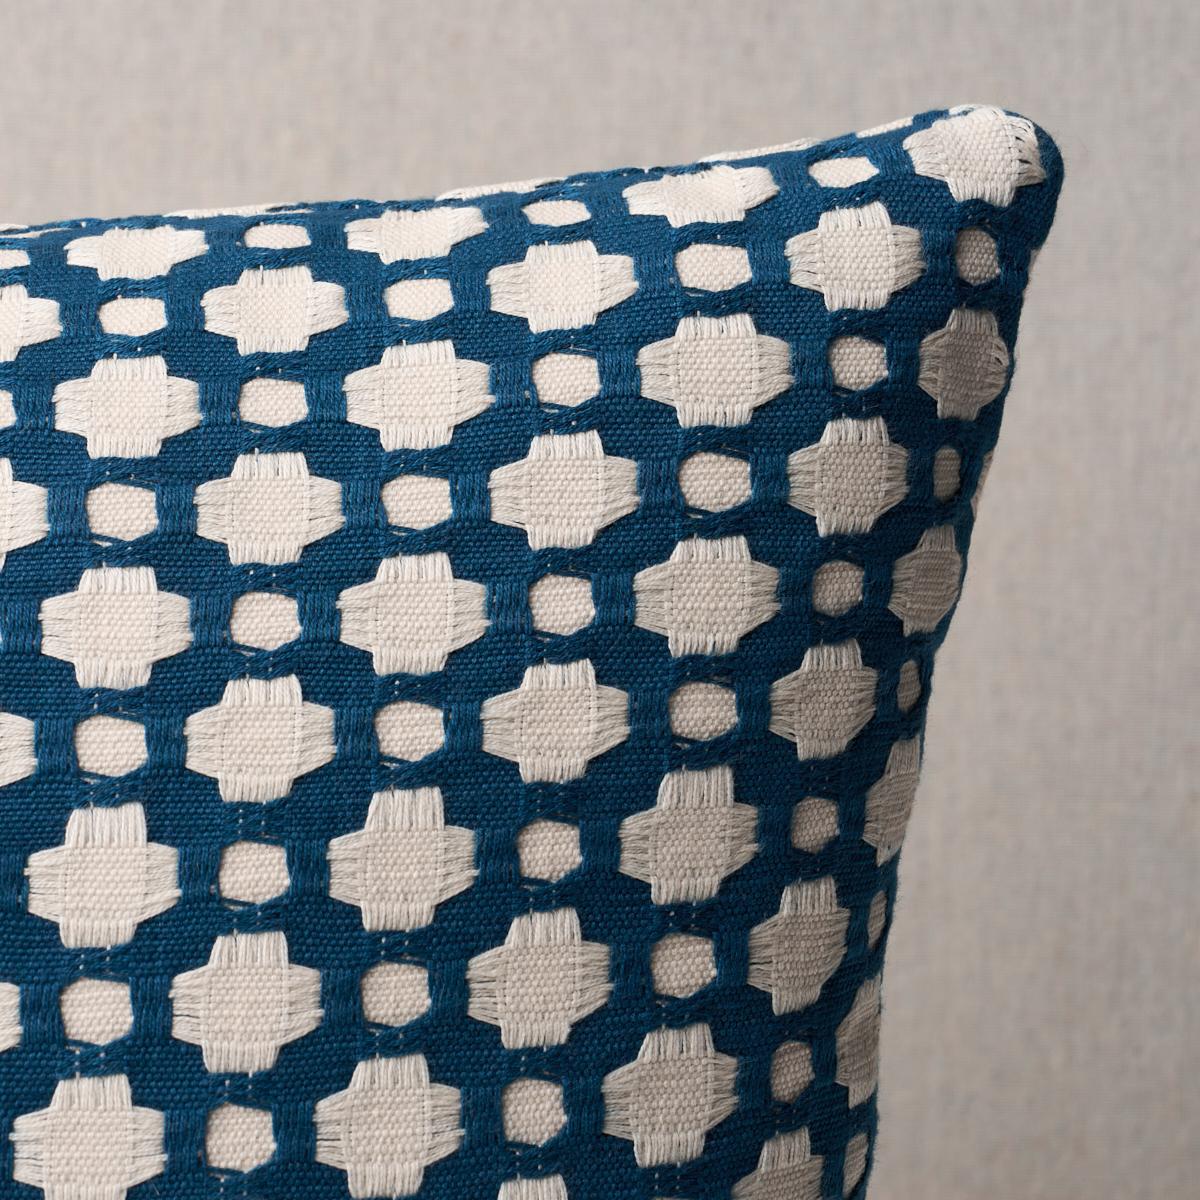 This pillow features Betwixt by Celerie Kemble with a knife edge finish. An endlessly versatile small-scale woven pattern with a handsome geometric look and an appealing, textural hand. Pillow includes a feather/down fill insert and hidden zipper